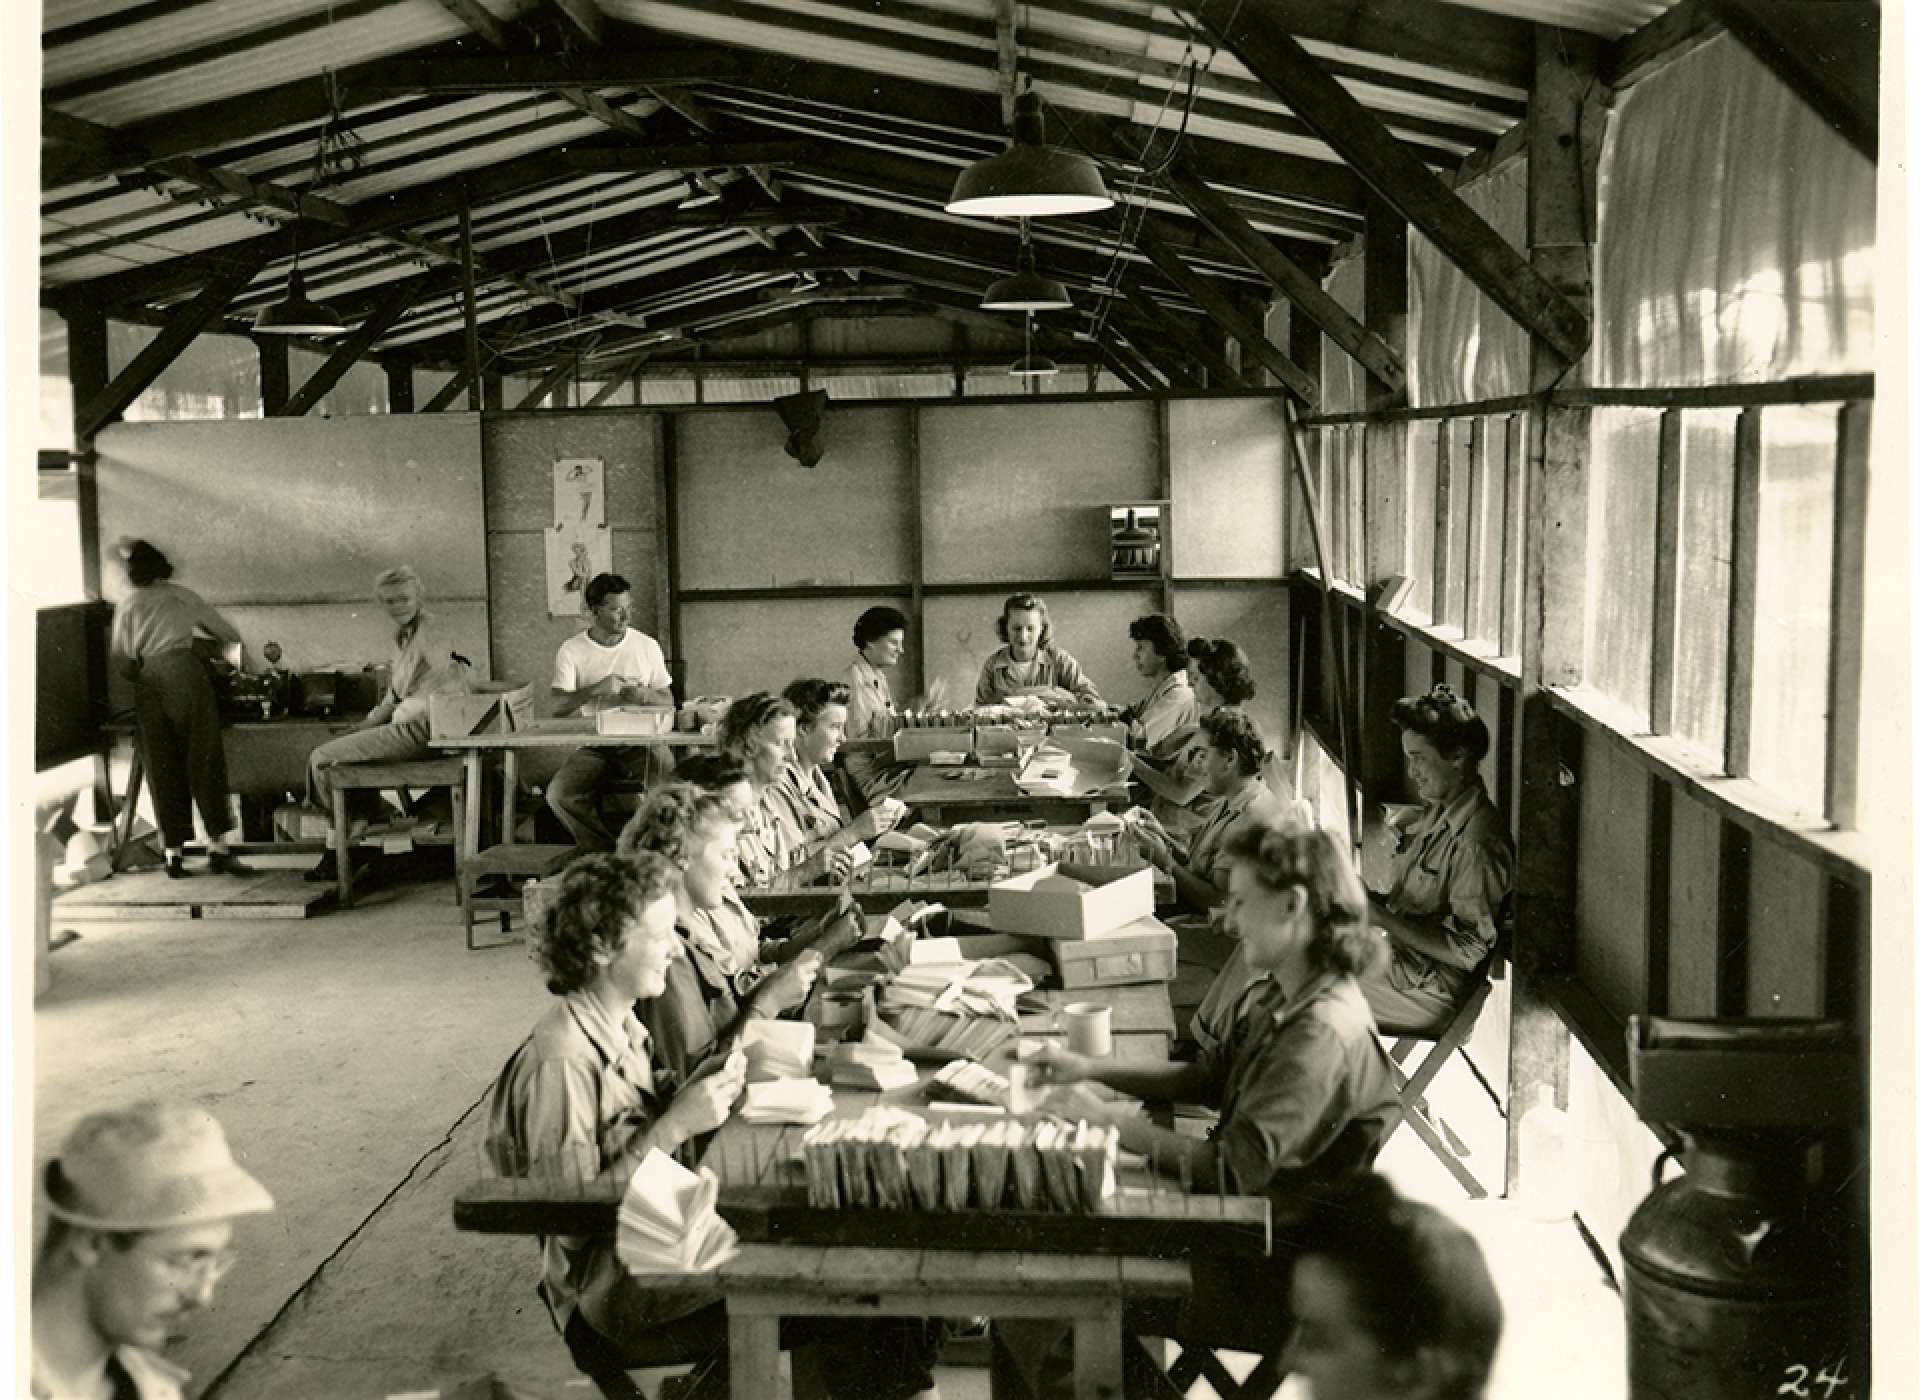 V-mail operation in the field at APO 929.&quot;This is a view of the inserting and sealing. At the long table the girls must hand-insert each letter, after which all the envelopes are fed through a sealing machine. In the rear, the sealed letters are then bundled and bagged for dispatch to the Post Office.&quot;